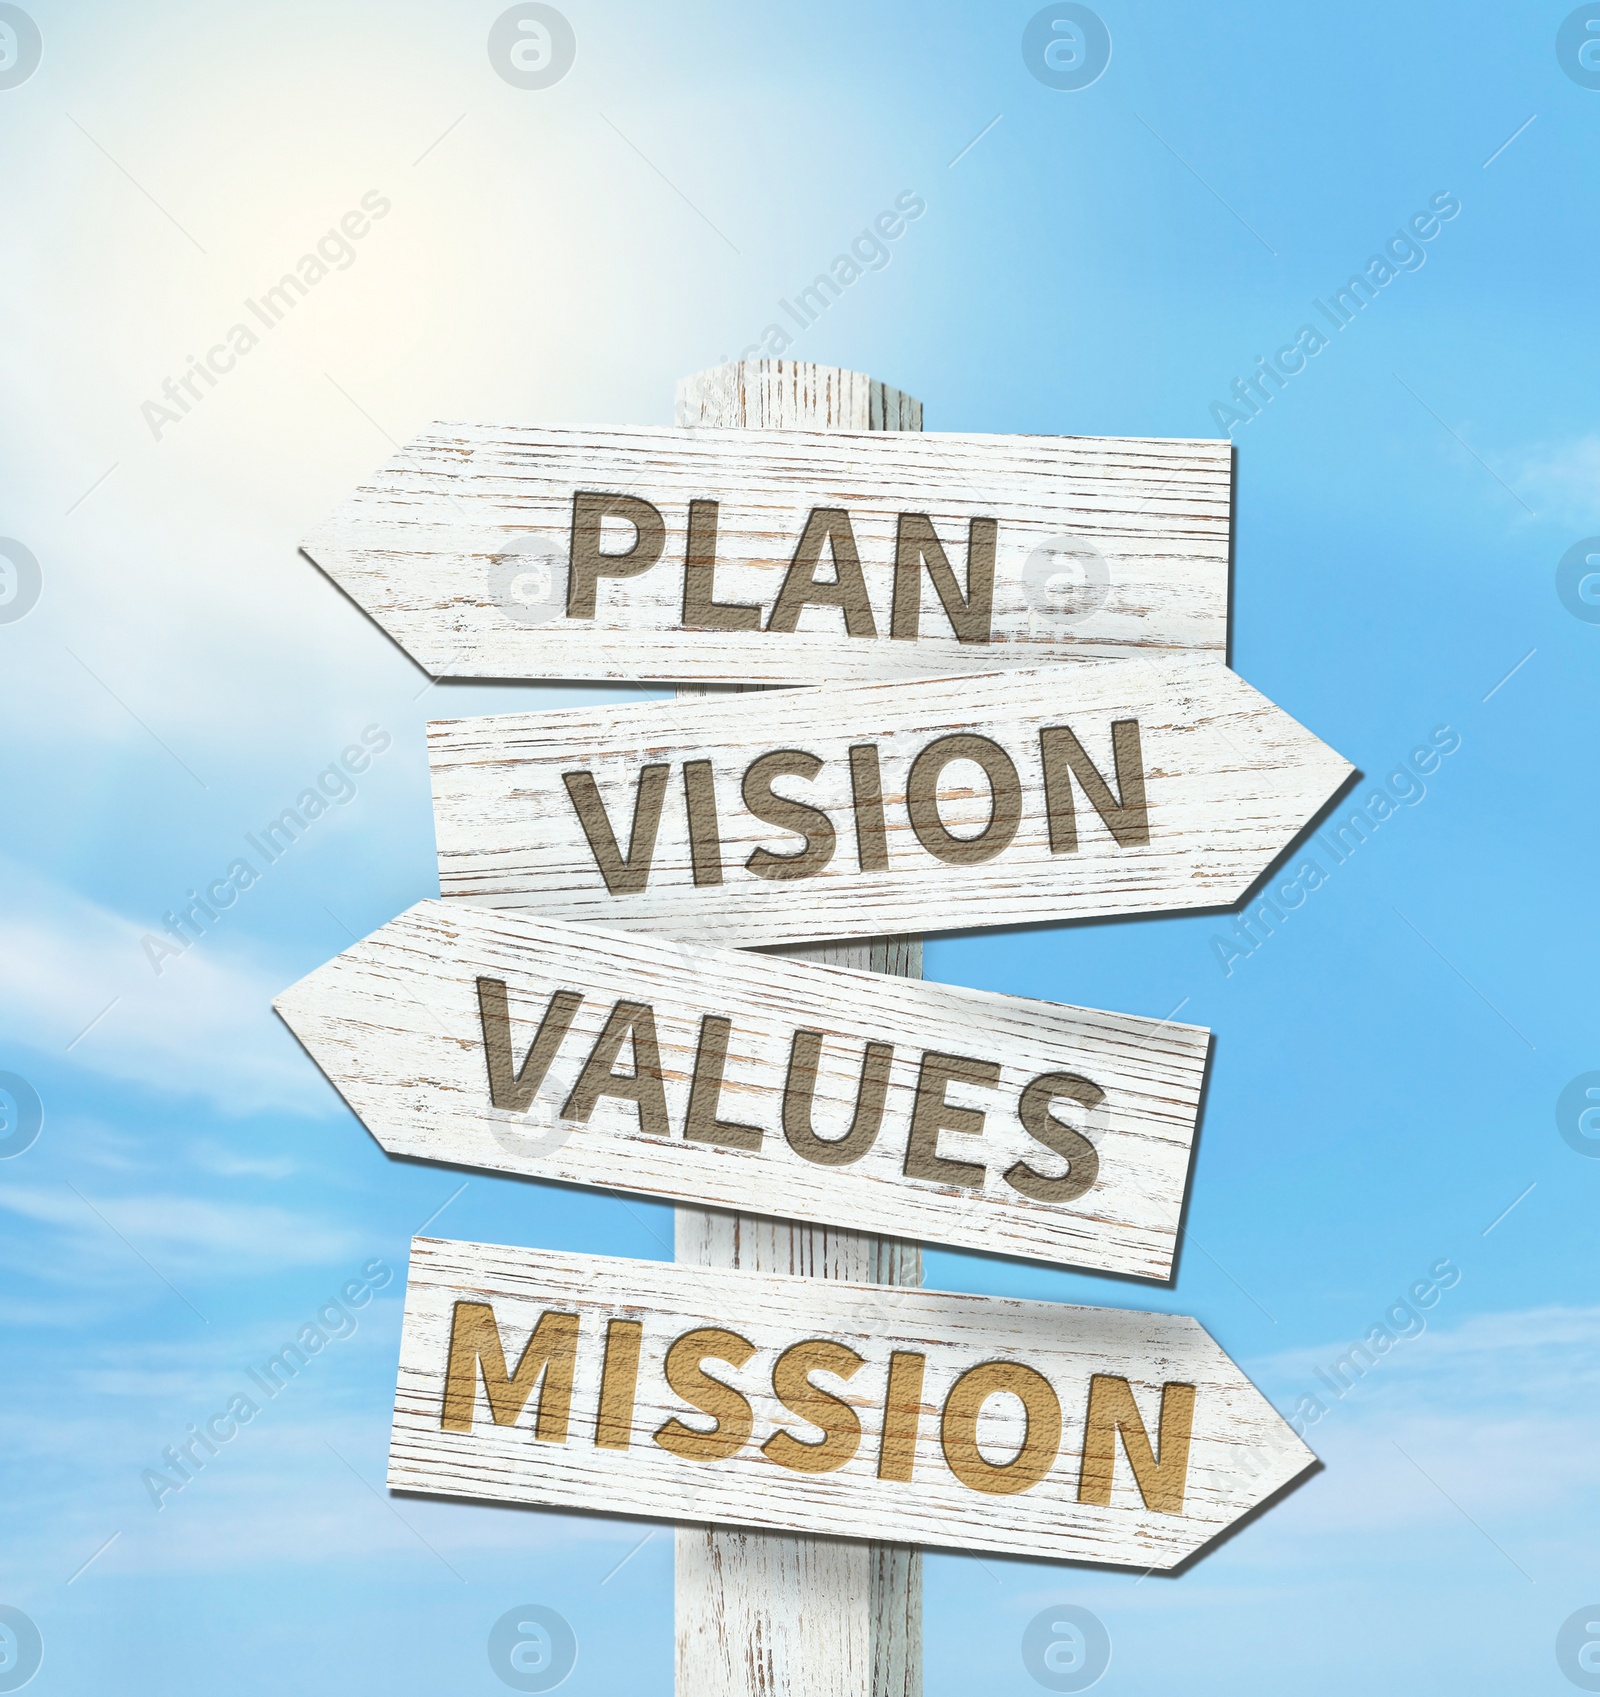 Image of Mission concept. Wooden signpost with different directions against blue sky